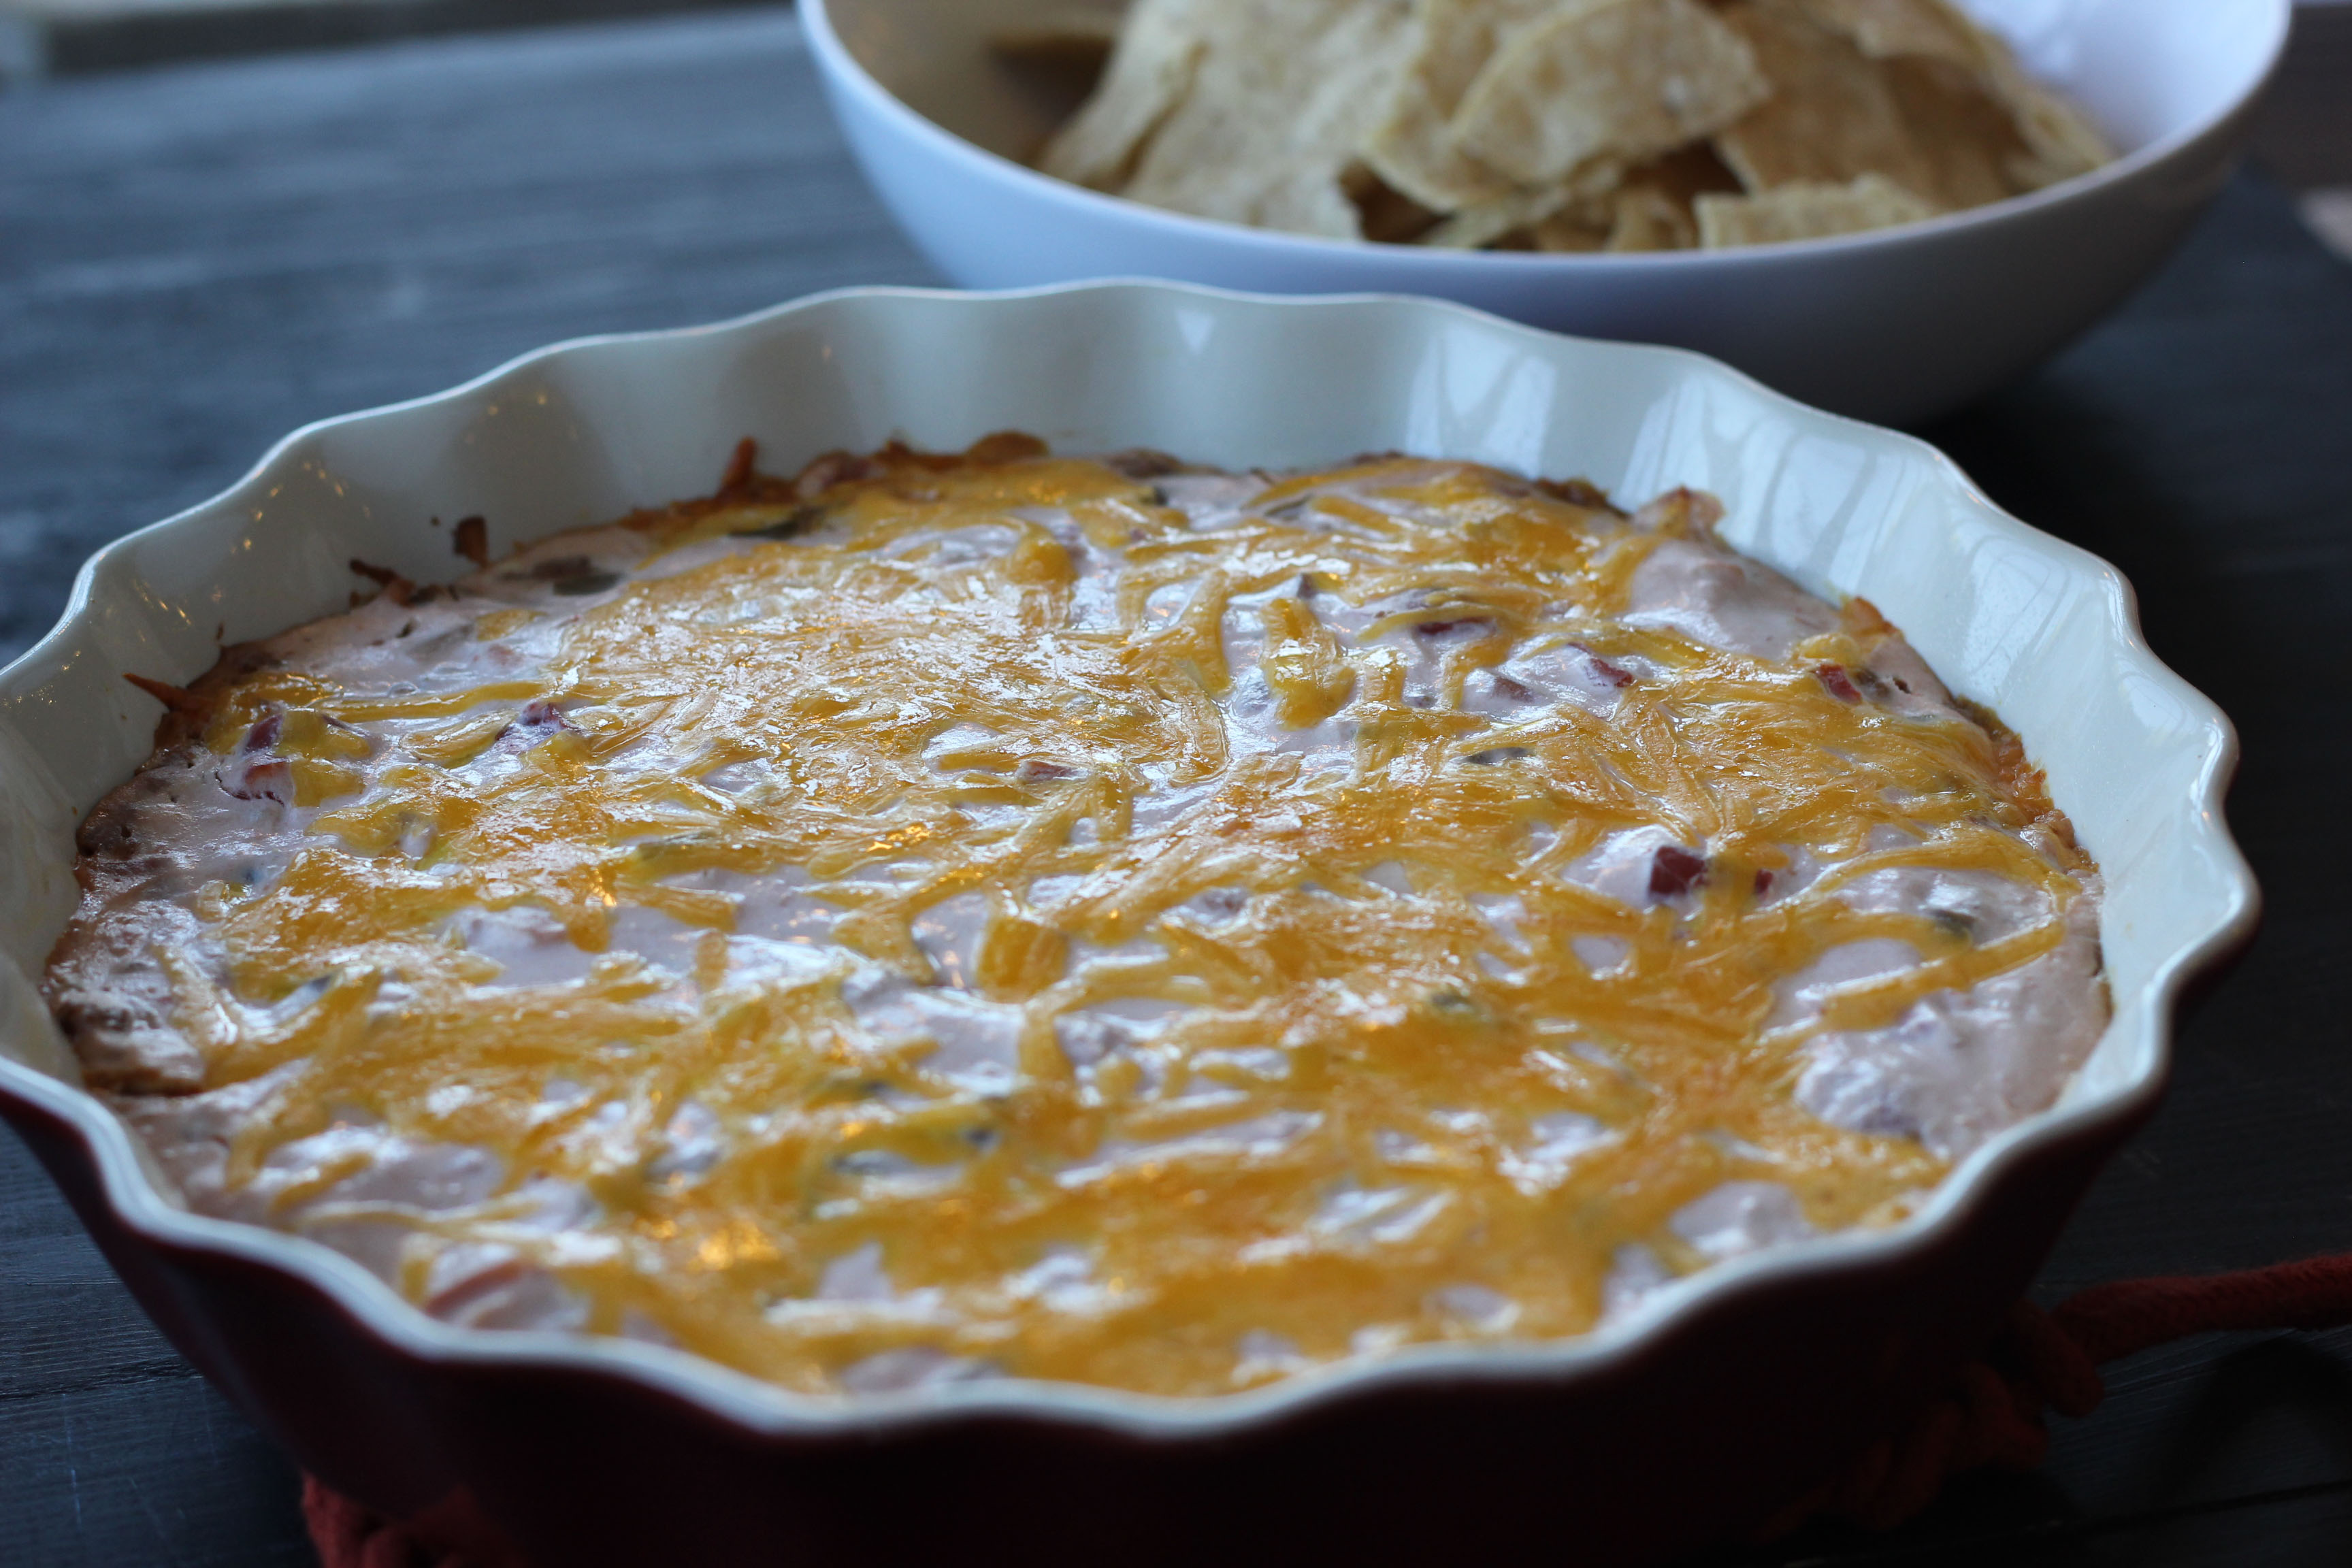 An image depicting the beans and basketball cheese dip this basketball season - brought to you by the Bean Institute!